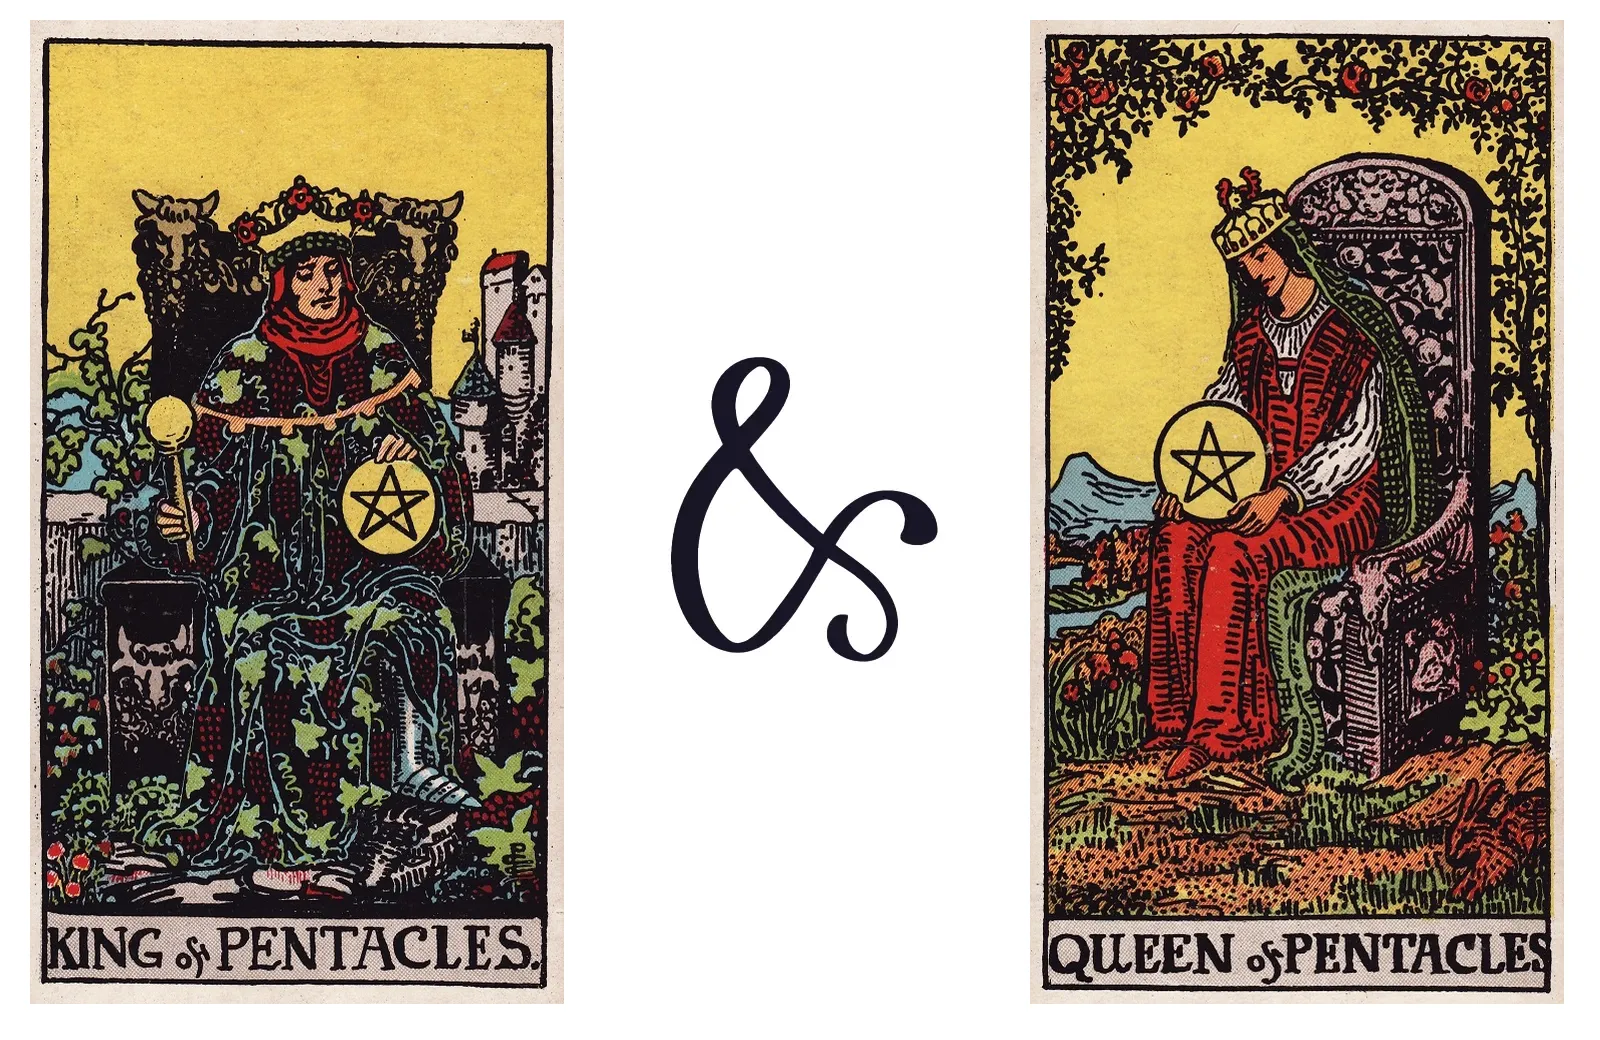 King of Pentacles and Queen of Pentacles